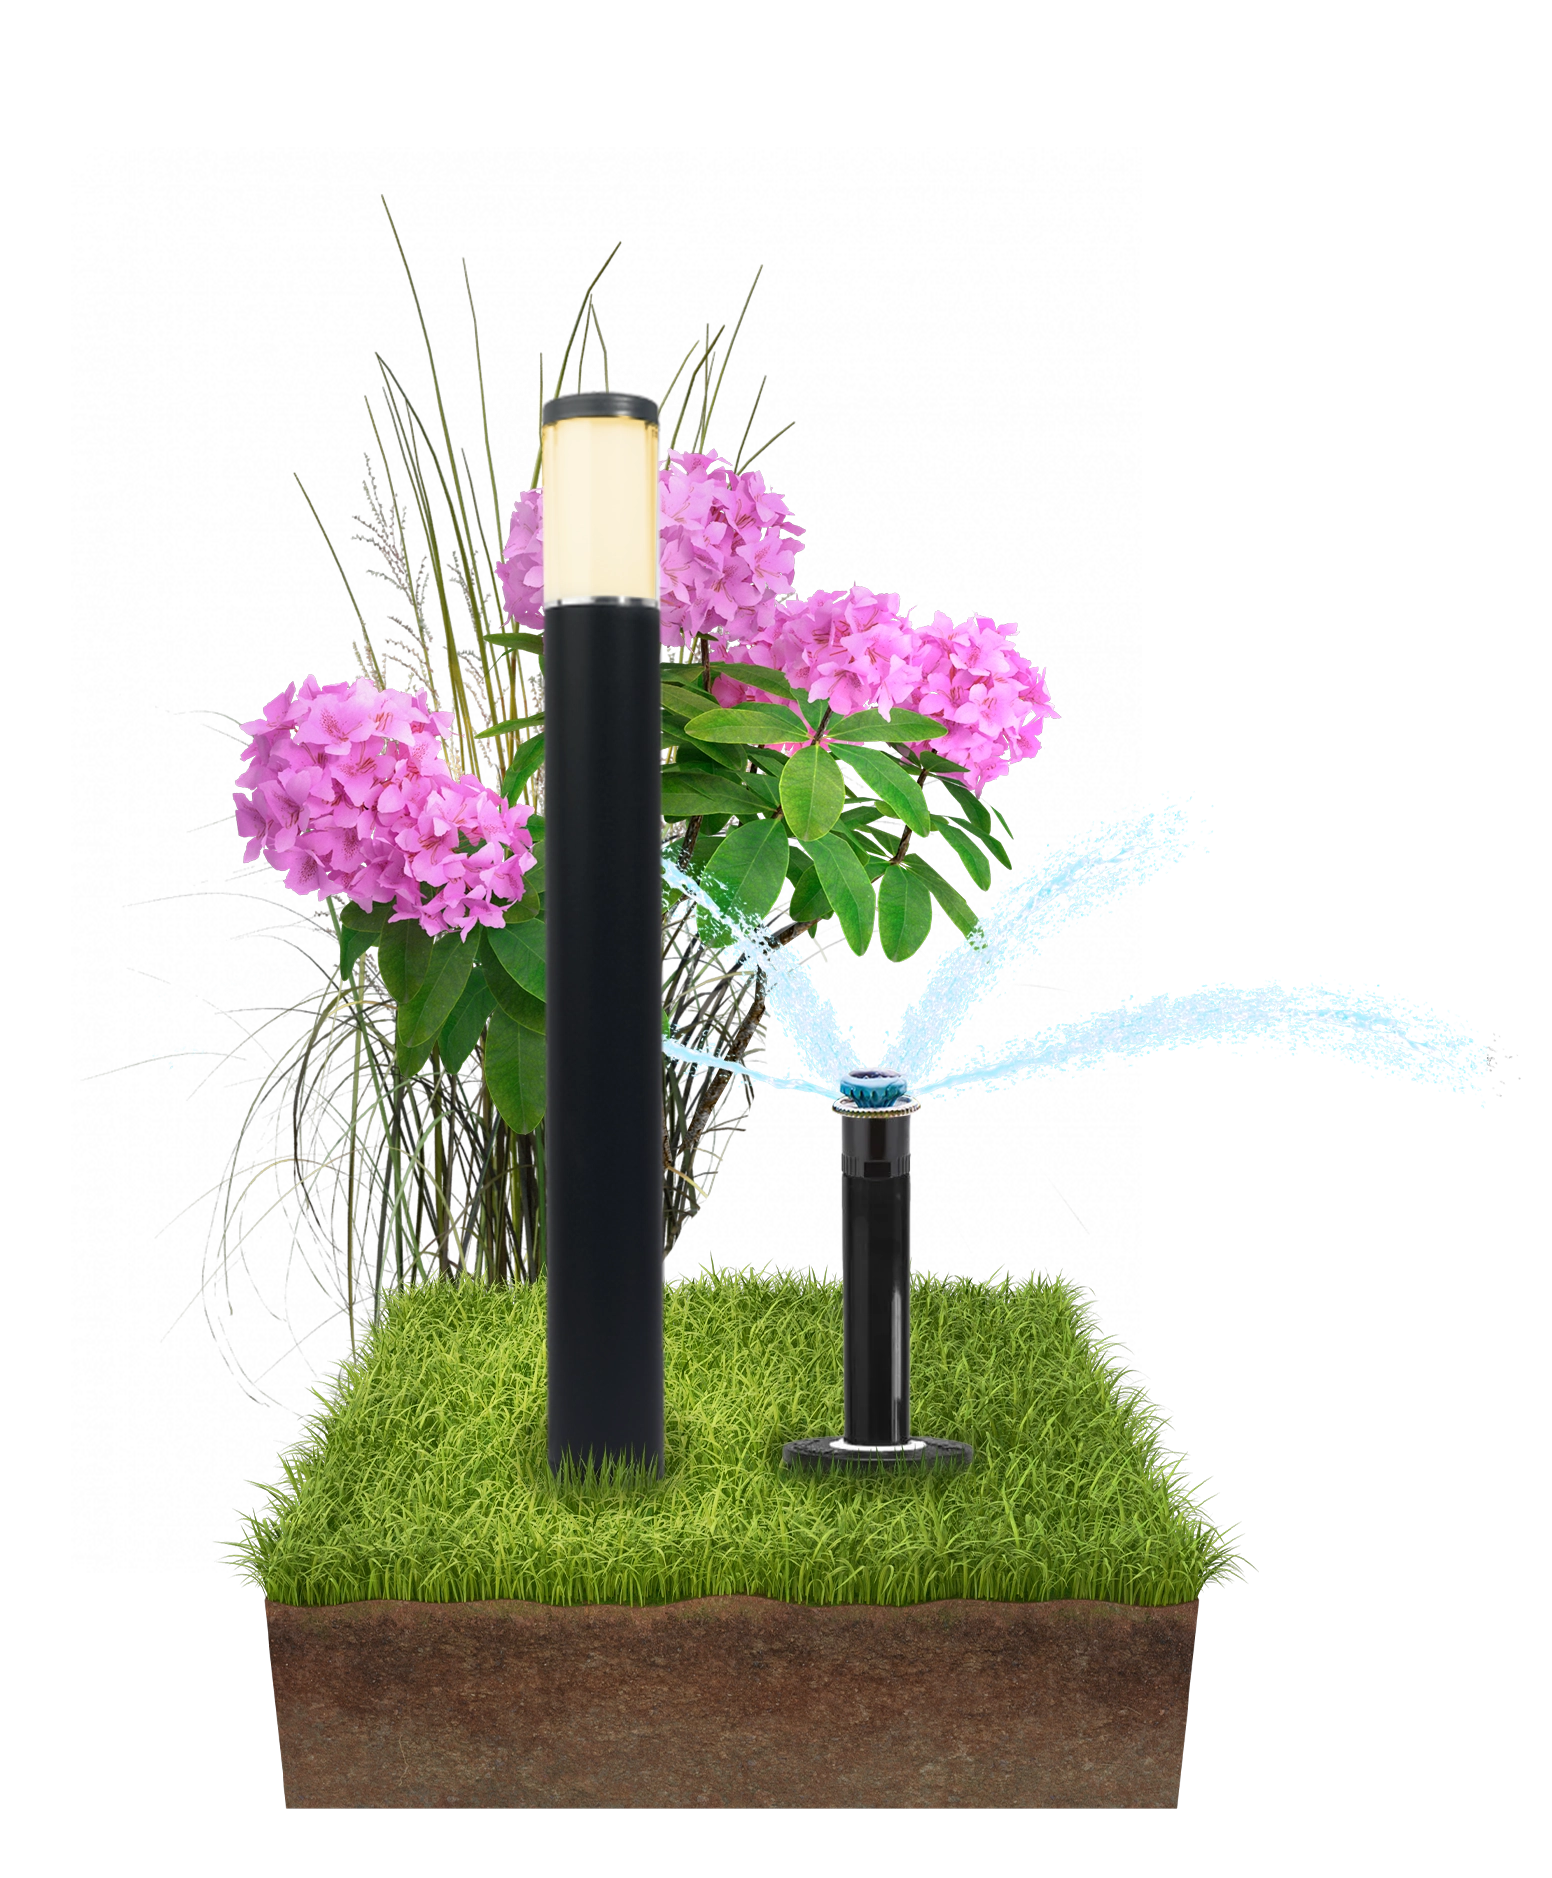 3d Model of Landscaping Light Fixture and Sprinkler Head, on a piece of turf with flowers in the background